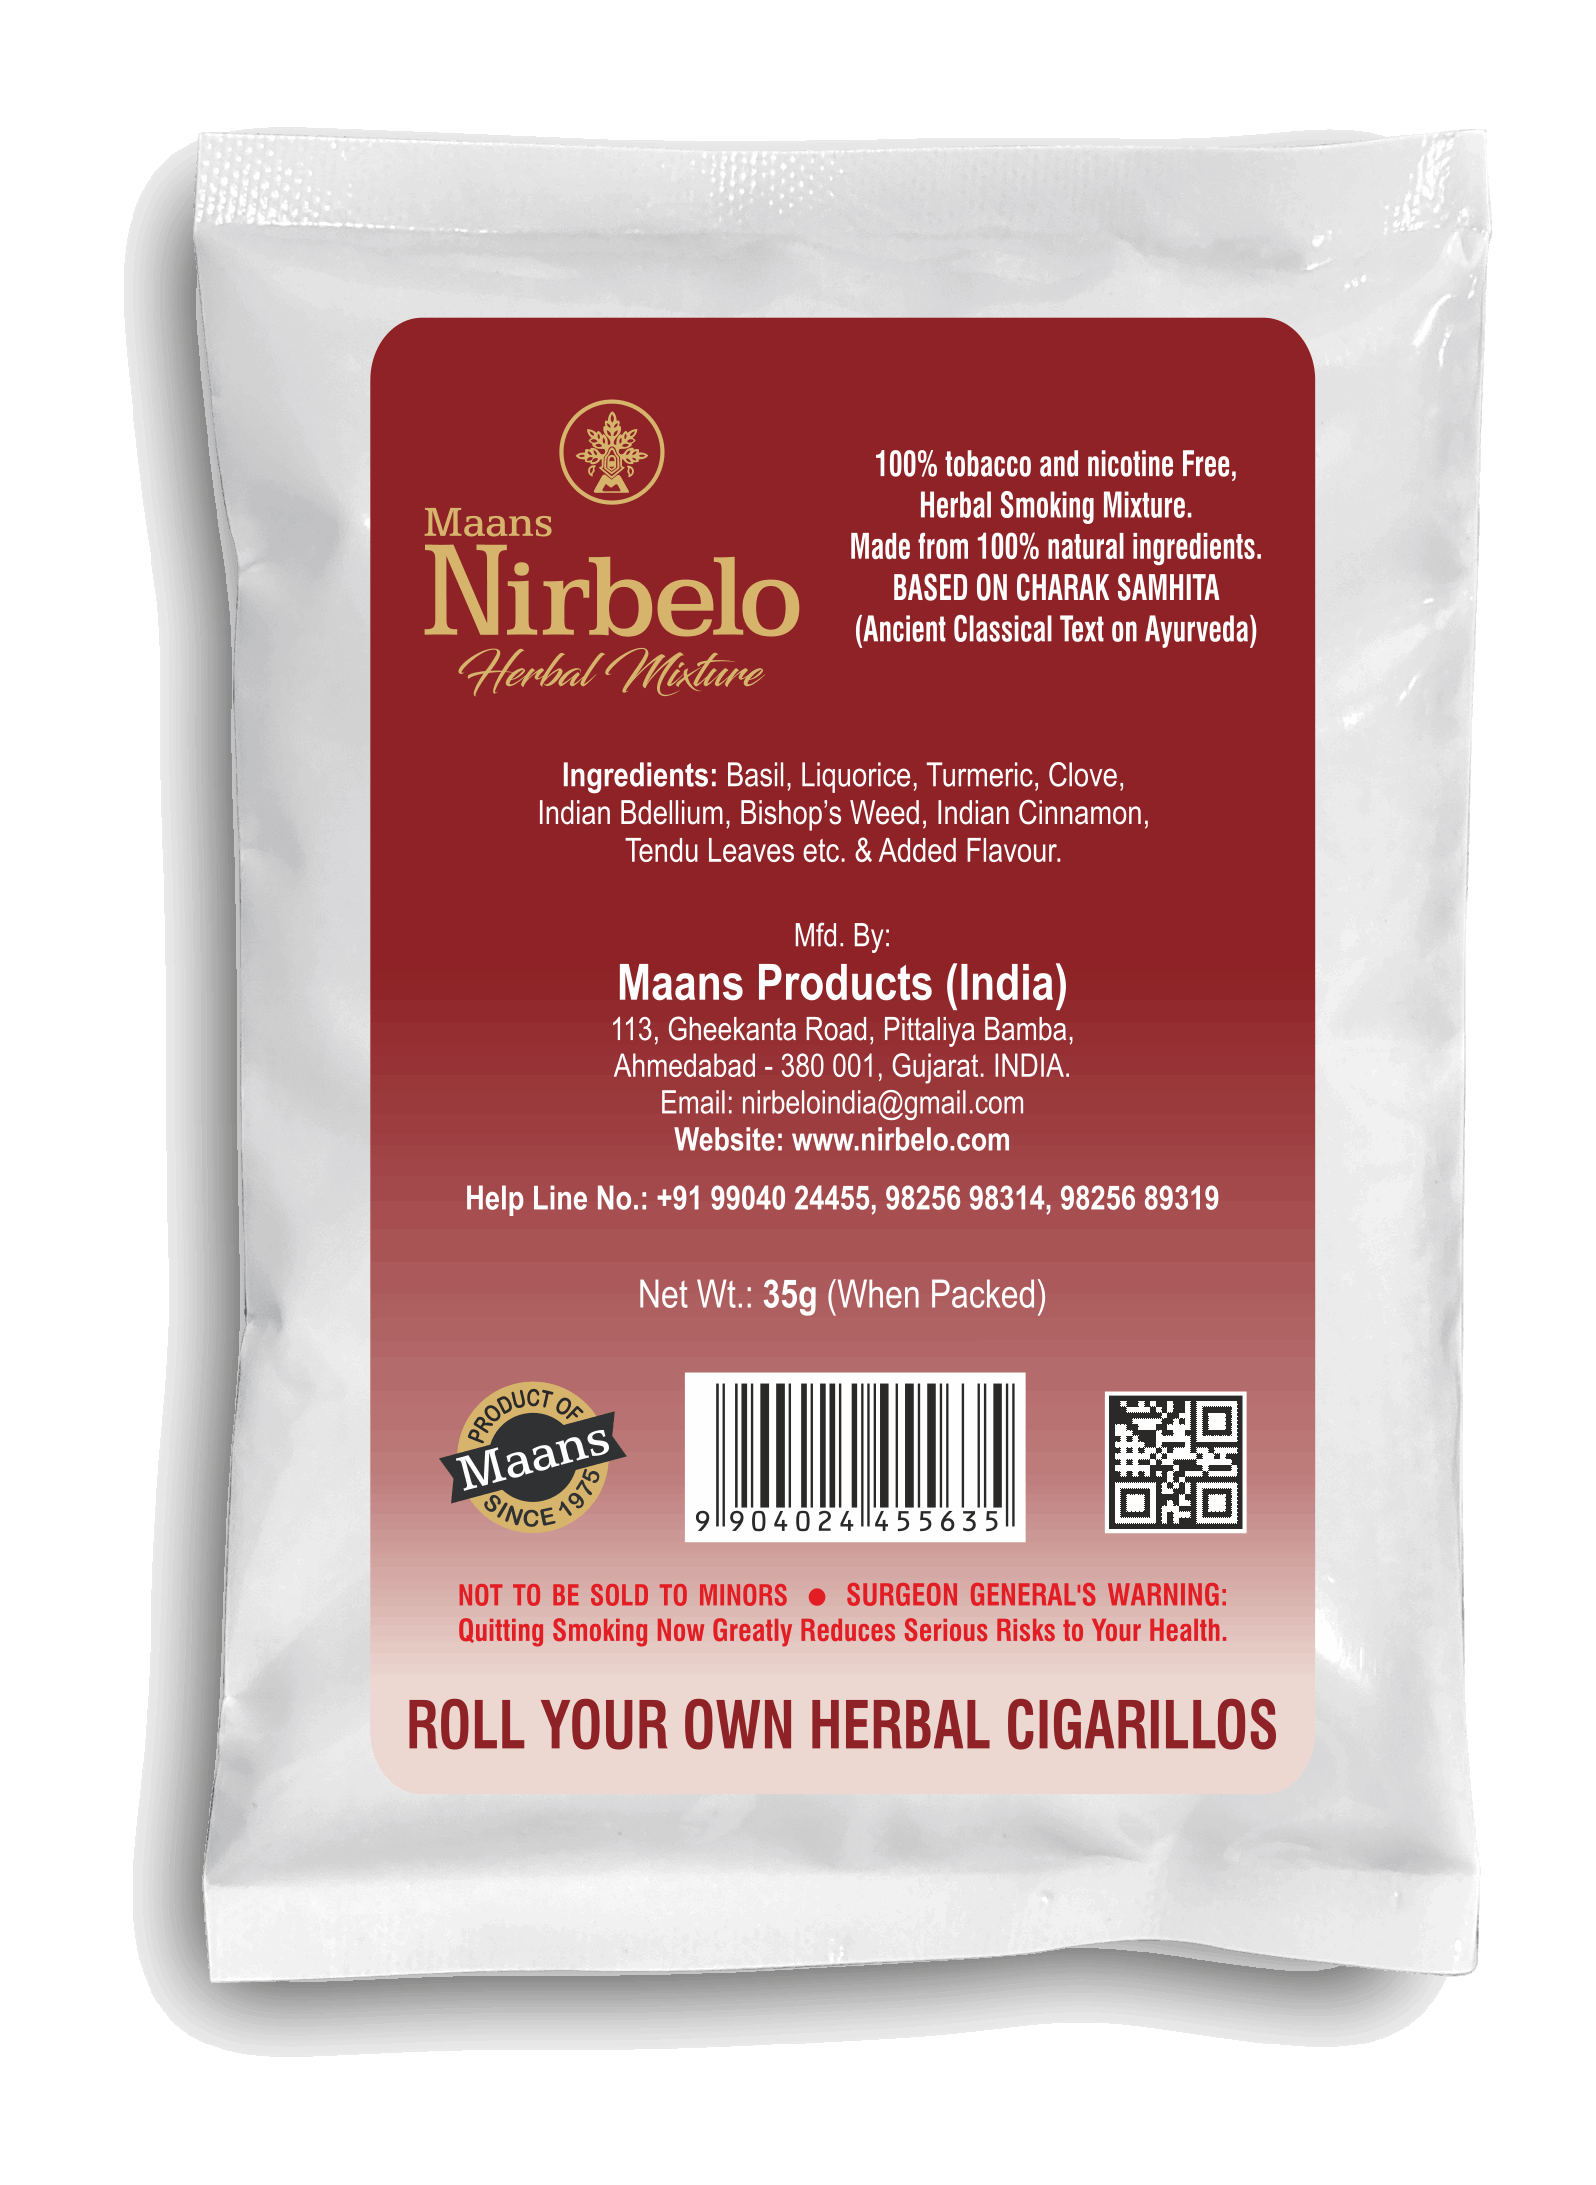 Nirbelo Herbal Raw Mixture Double Apple Flavor 100% Tobacco Free & Nicotine Free Natural Organic Ingredients for Quit Smoking & Nature's Alternative to Tobacco